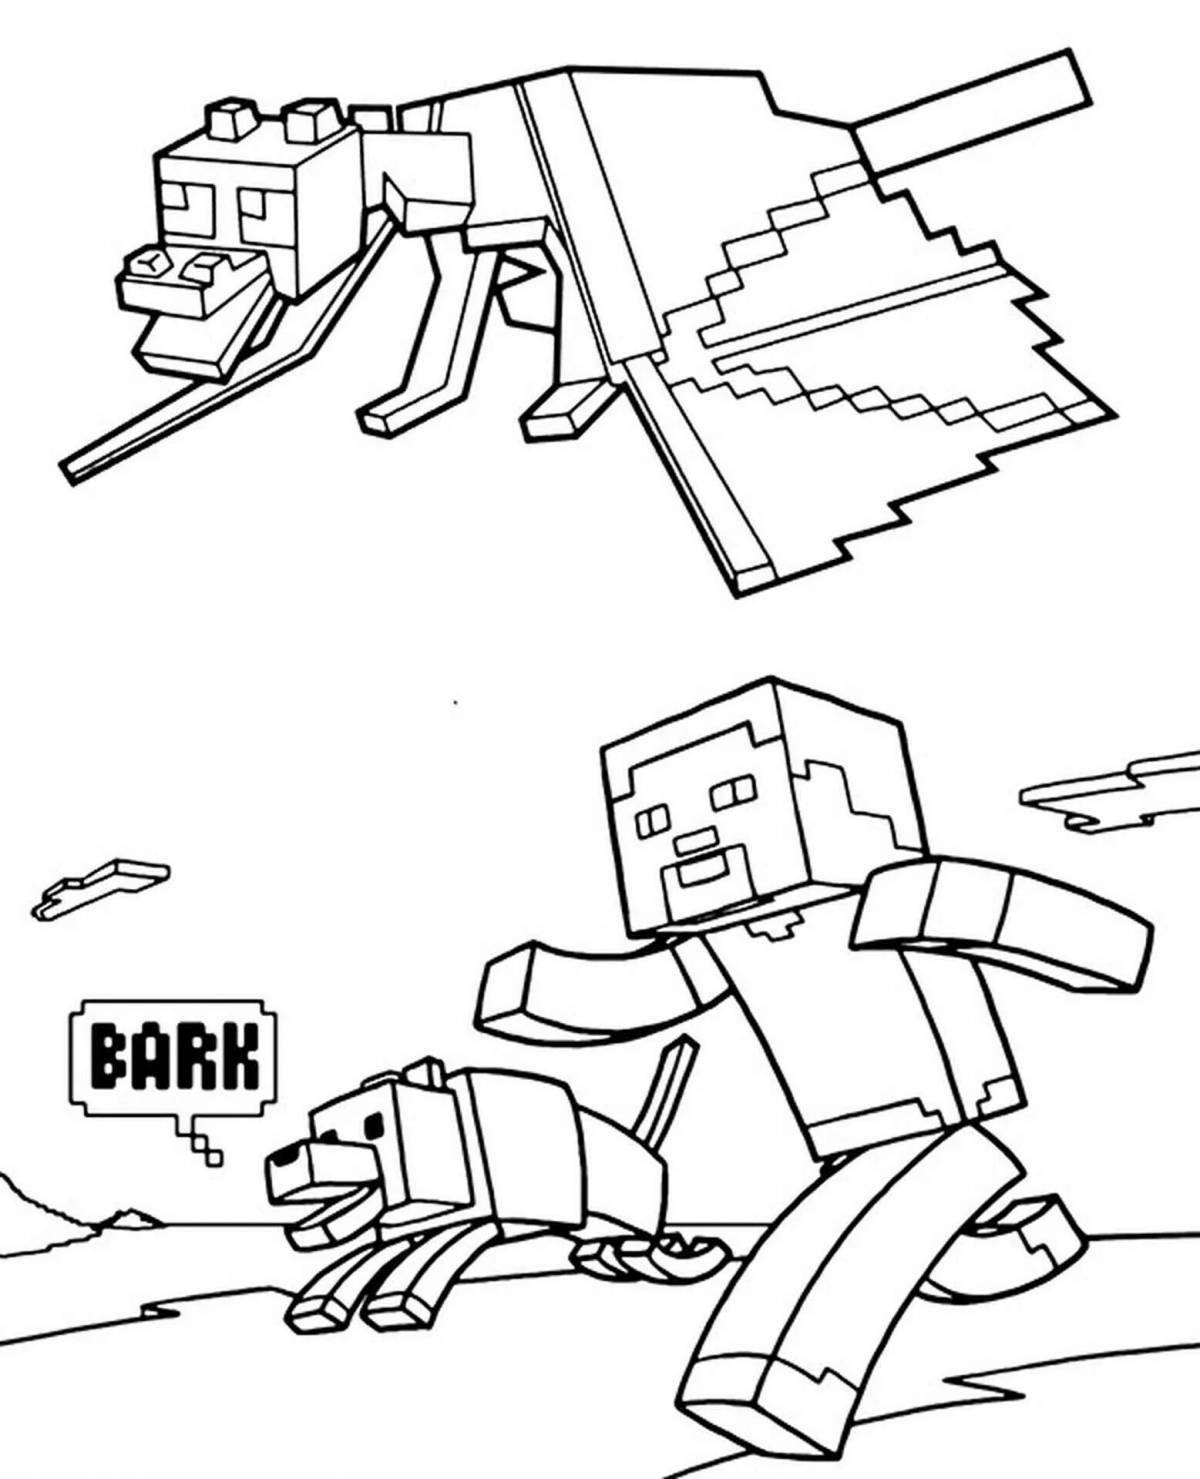 Intriguing minecraft world coloring page